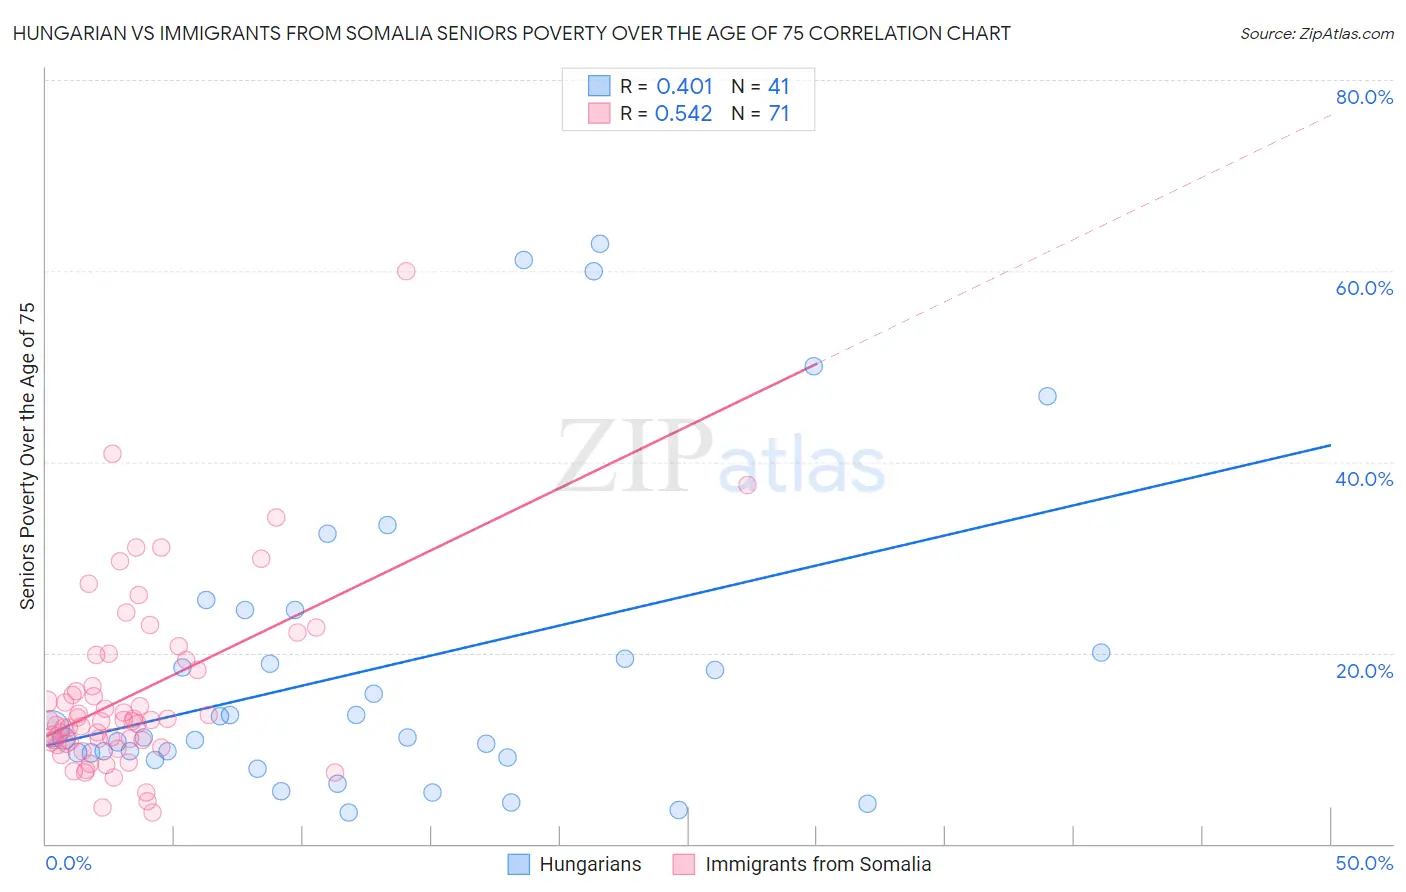 Hungarian vs Immigrants from Somalia Seniors Poverty Over the Age of 75